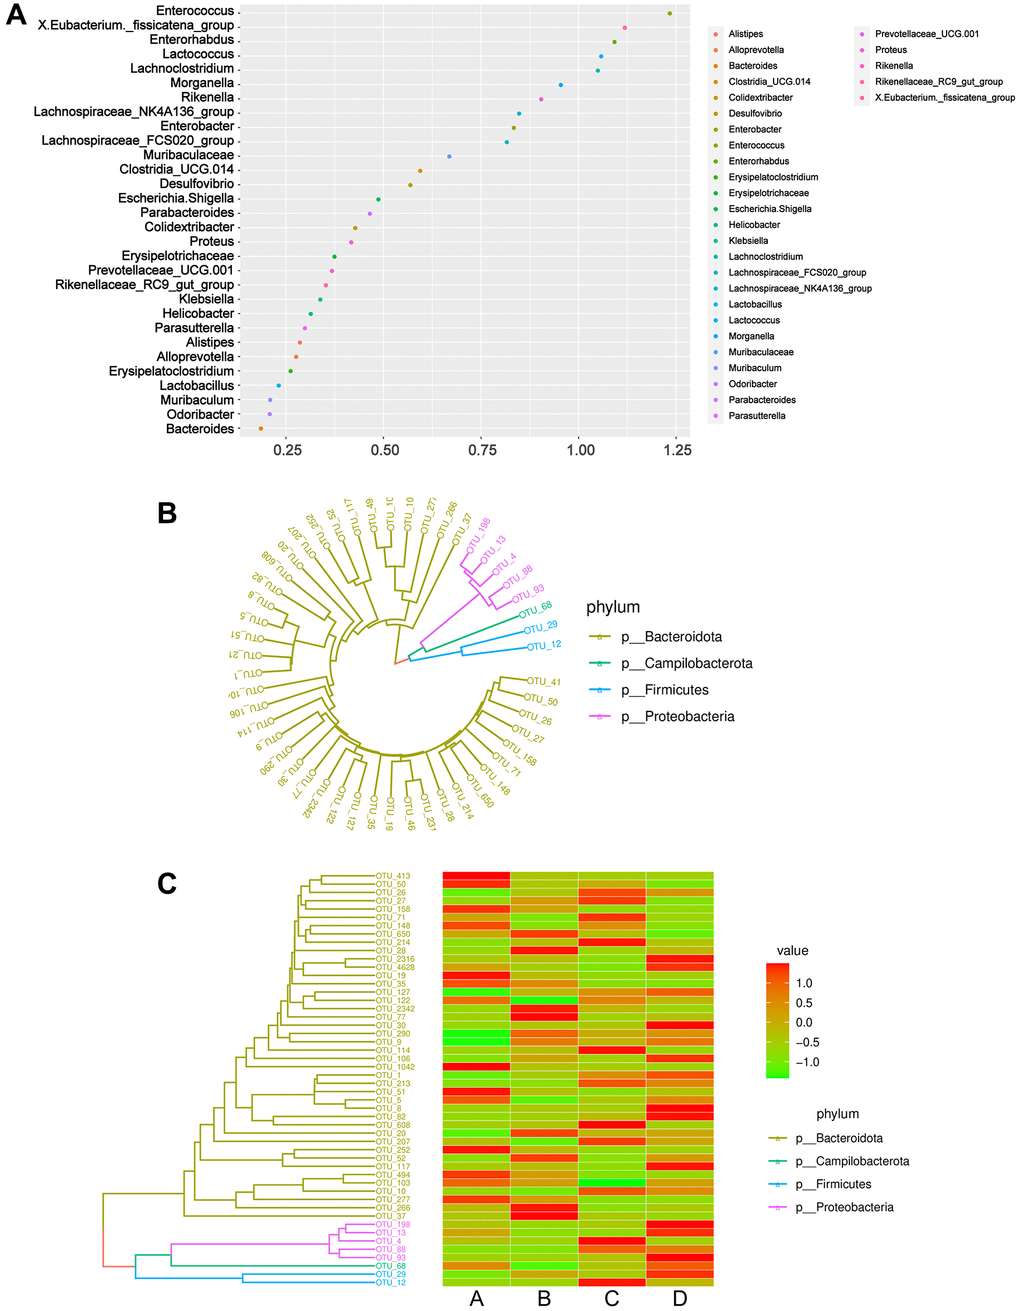 Phylogeny analysis and classification of microbiome community samples. (A) Genera importance point plot. The X-axis represents the measure of importance, and the Y-axis is the genera names ranked by importance. Normalized importance values are used by default in the plot. (B) Phylogenetic tree diagram. Different colors correspond to different phyla. (C) Combination diagram of species abundance and phylogenetic tree. The left is the phylogenetic tree diagram; the right is the abundance map, corresponding to the abundance of the OTU on the left in each group. Abbreviation: OTUs: operational taxonomic units.